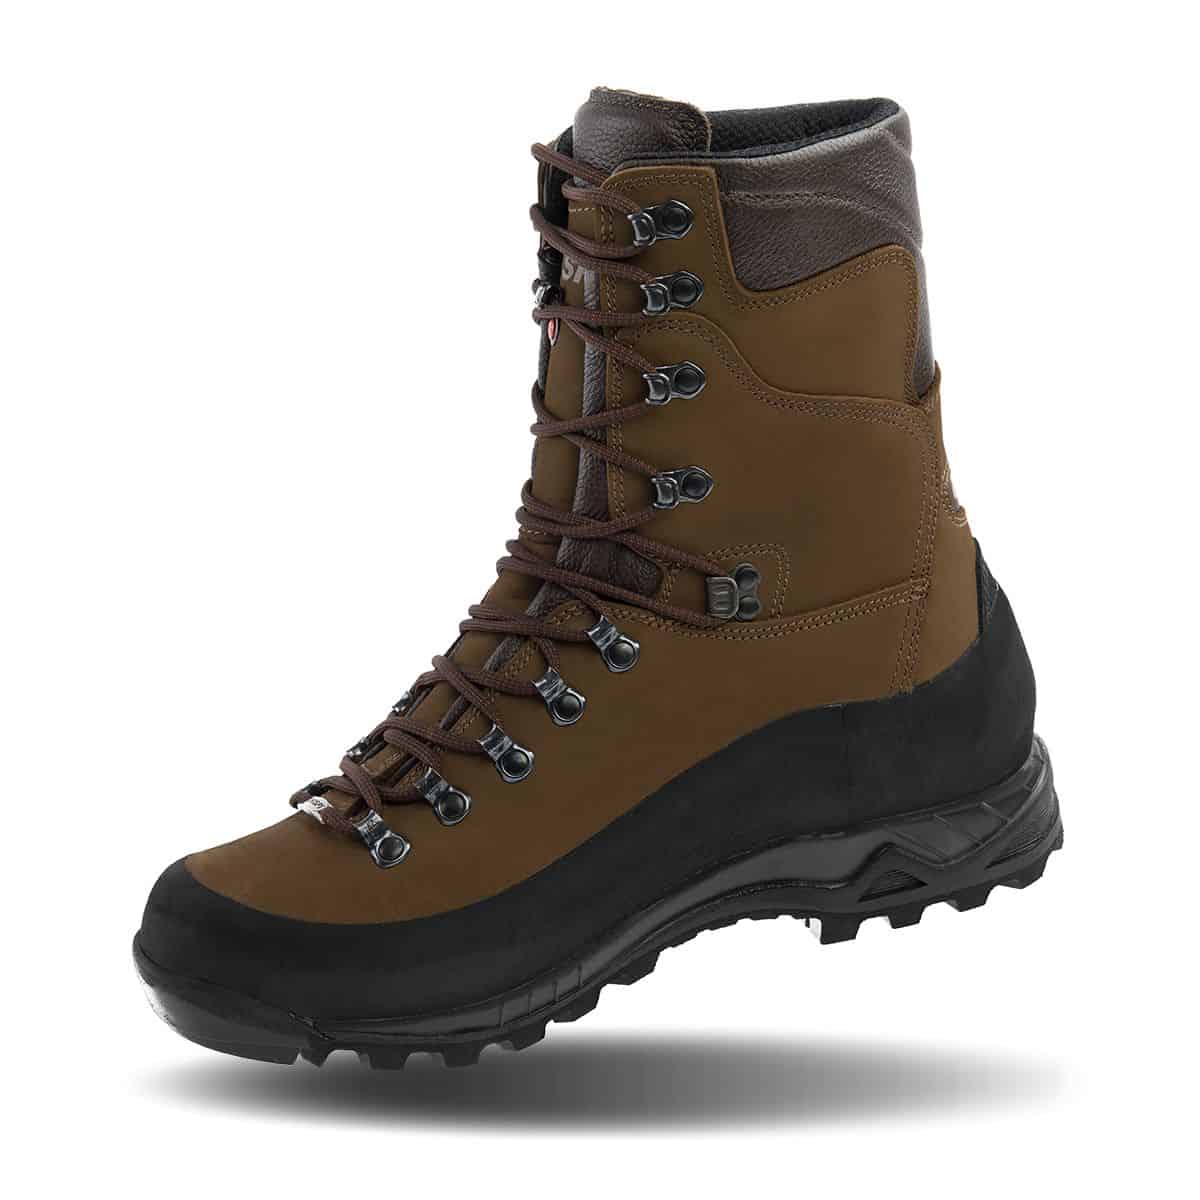 CRISPI Guide GTX Insulated Hunting Boot Left